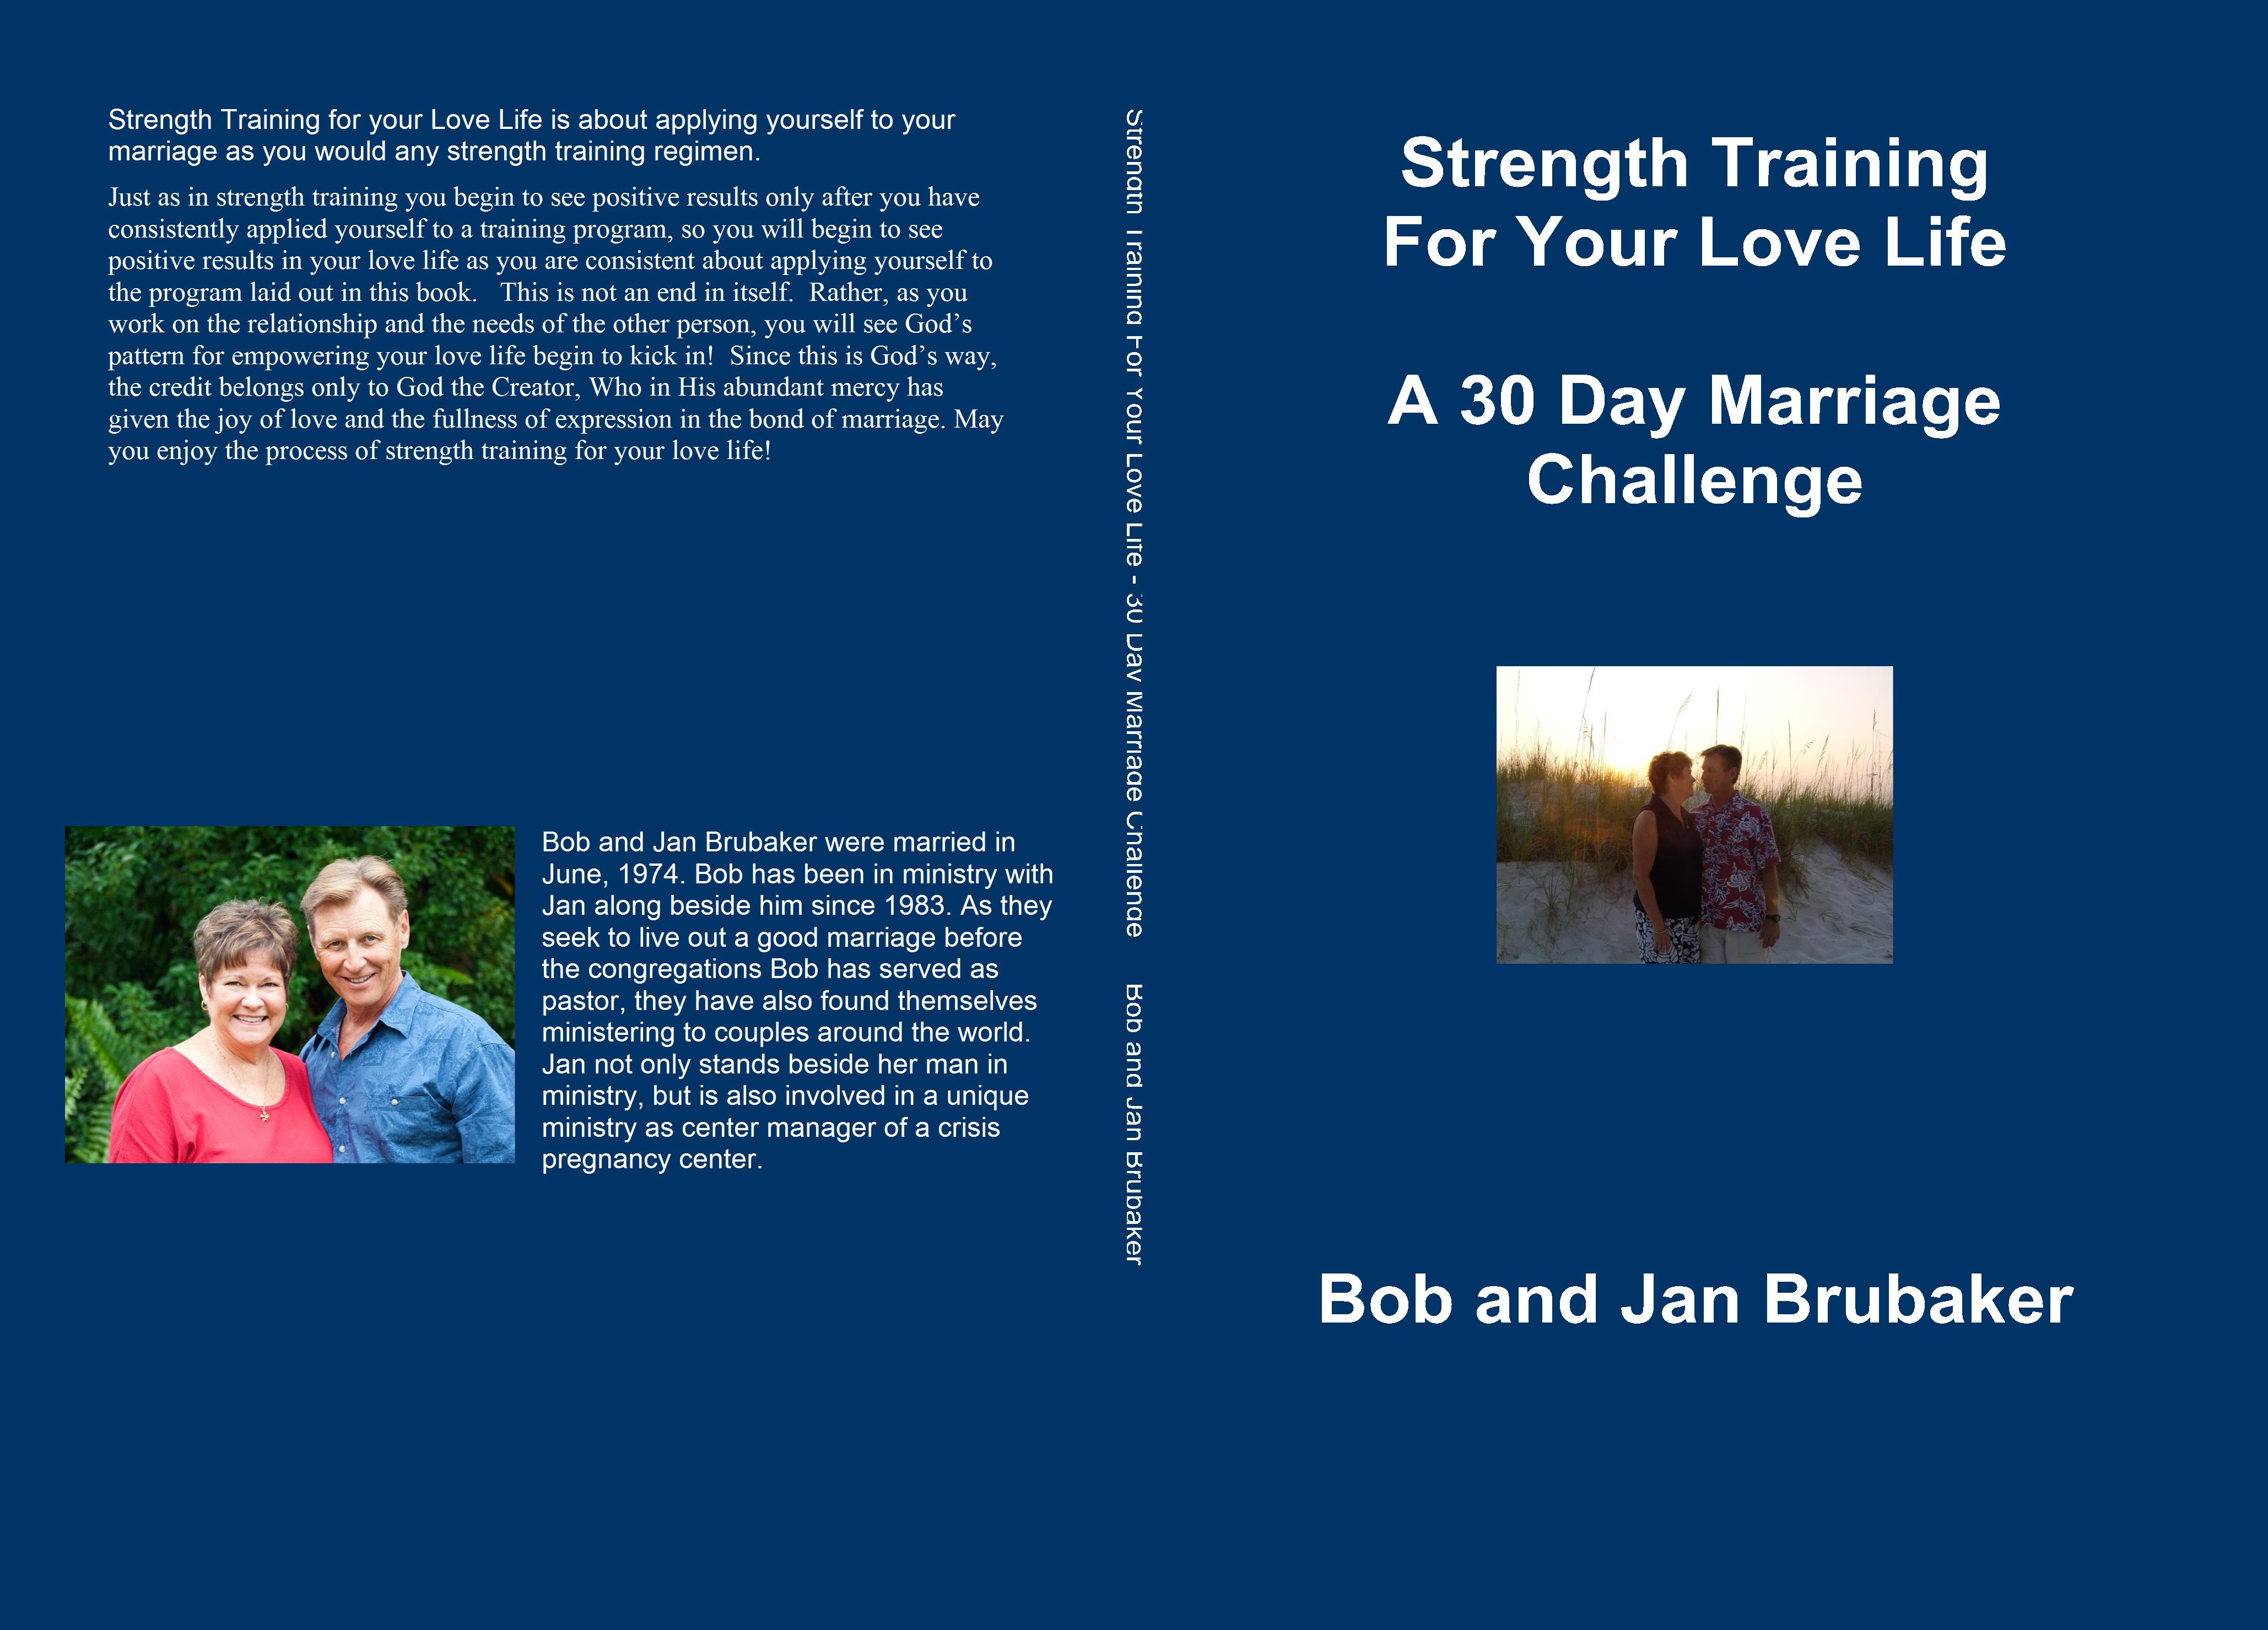 Strength Training For Your Love Life A 30 Day Marriage Challenge cover image